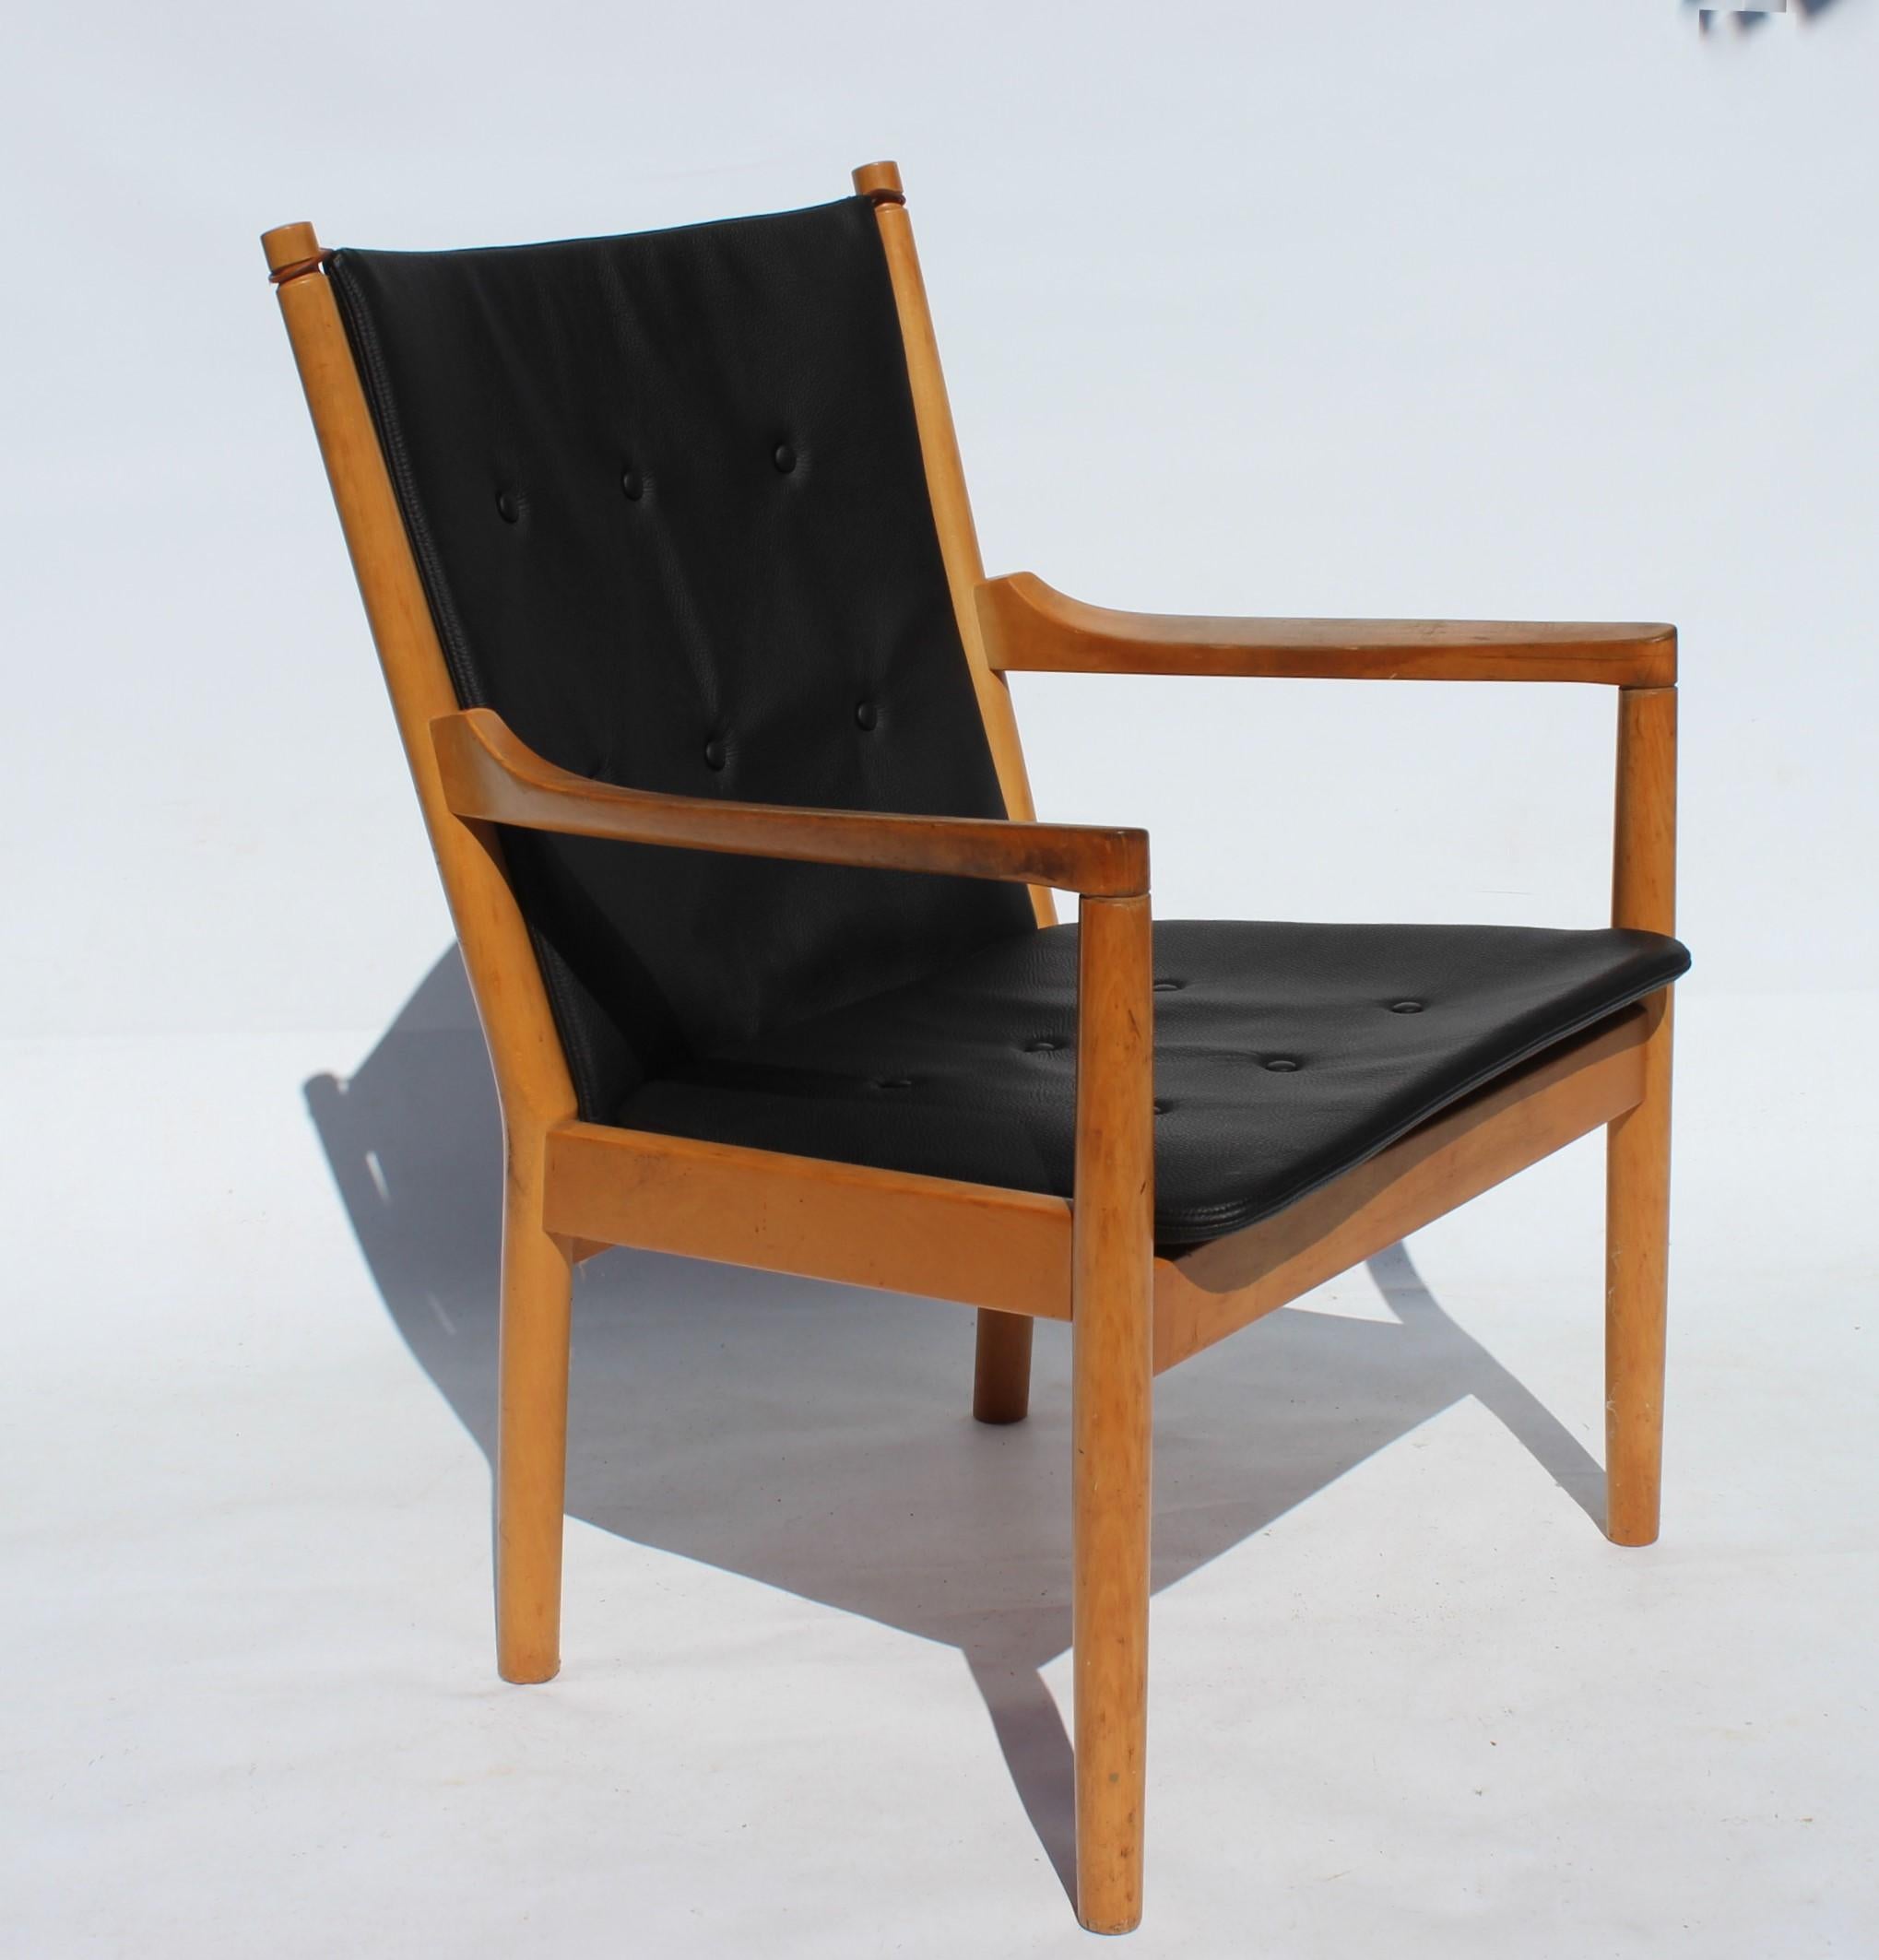 The armchair, known as model 1788, is an elegant piece of furniture with an iconic wooden back in beech wood and cushions upholstered in black leather. Designed by the renowned Danish architect and furniture designer Hans J. Wegner in 1978 and